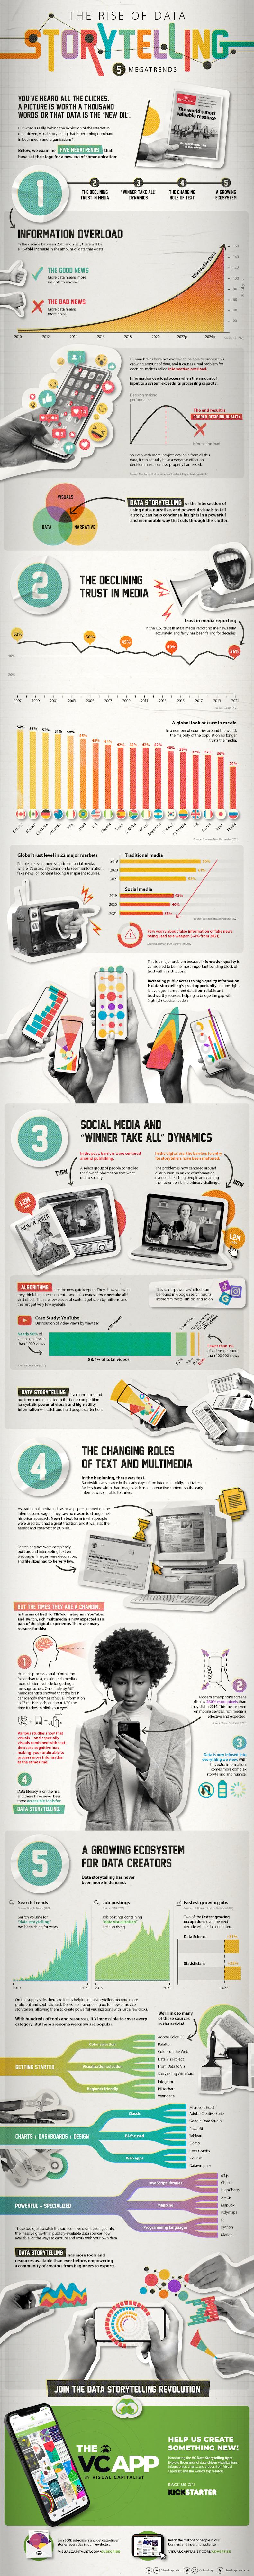 The rise of data storytelling infographic